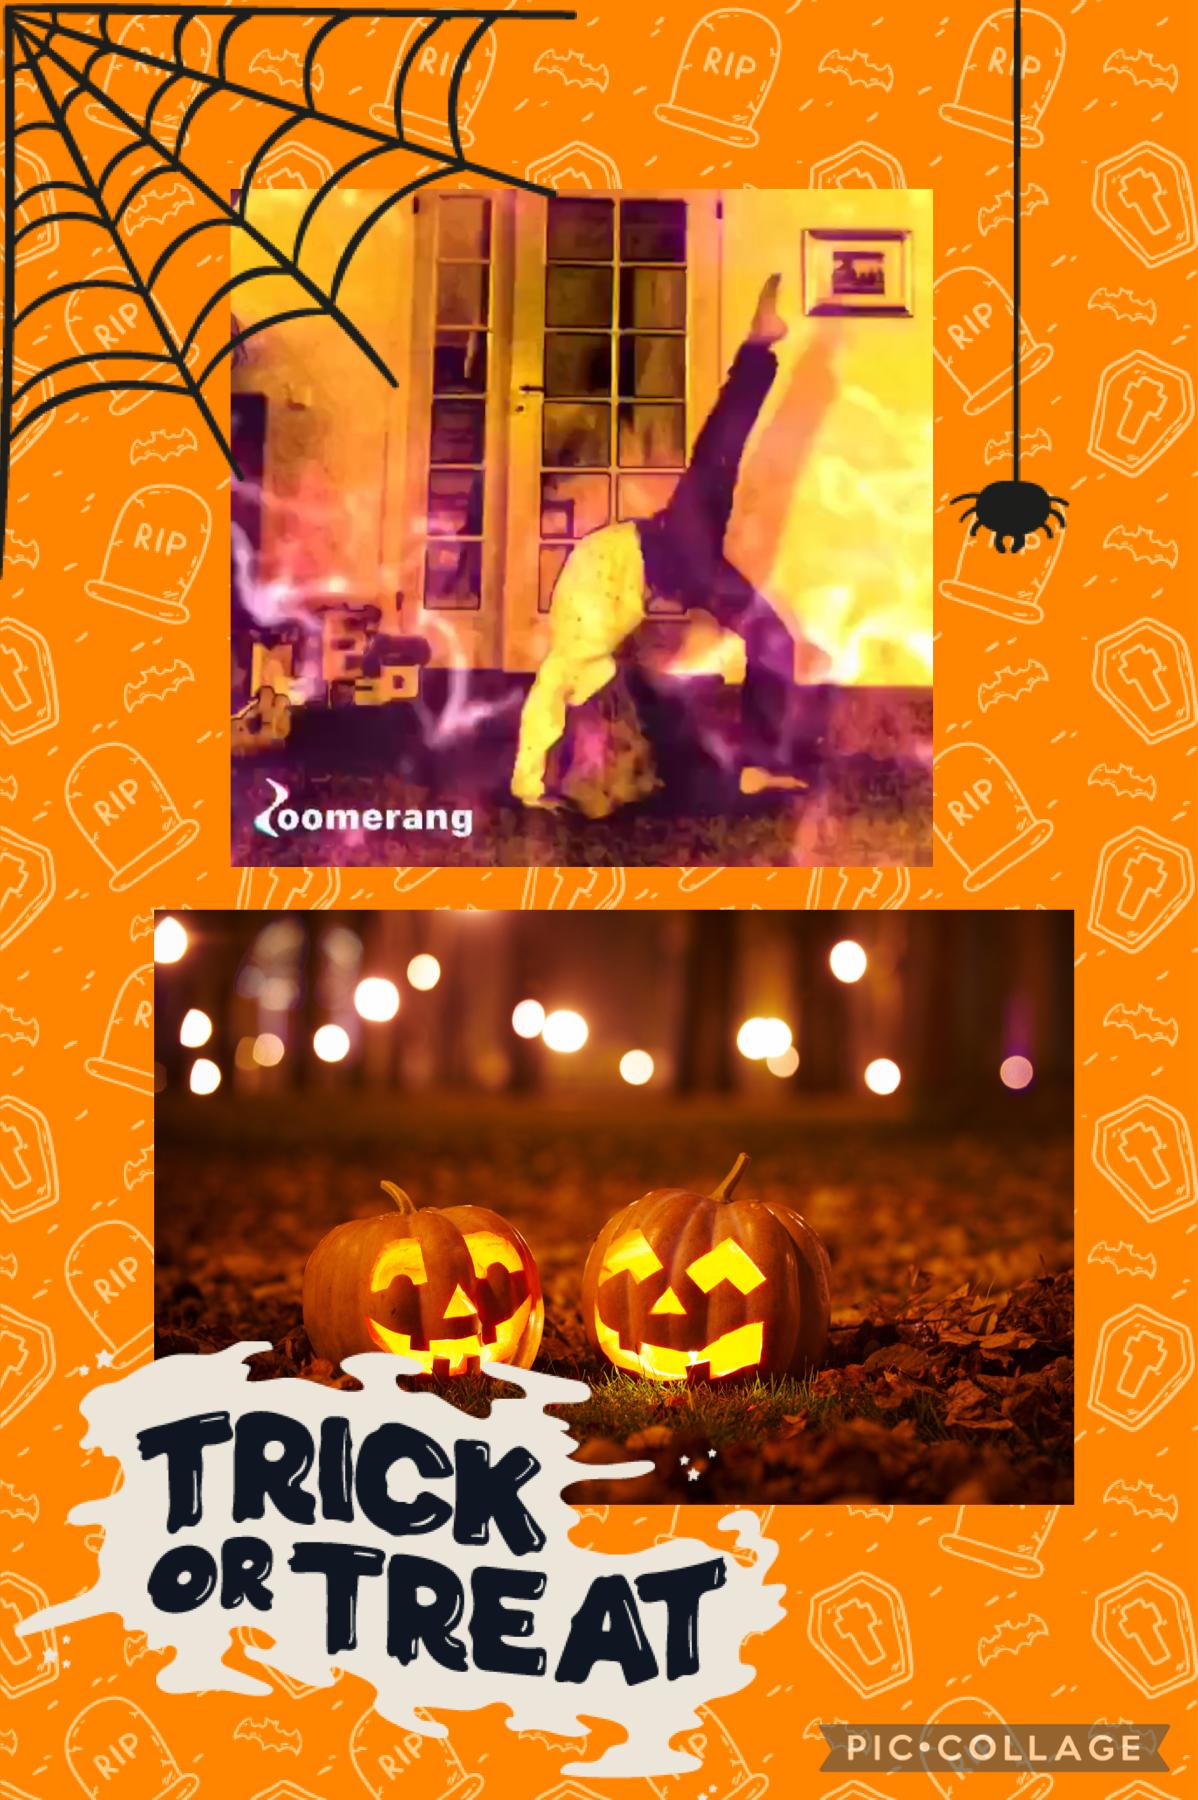 Press for info. 
I used the new template🎃
It’s soon Halloween! I post 5 times a week!✨